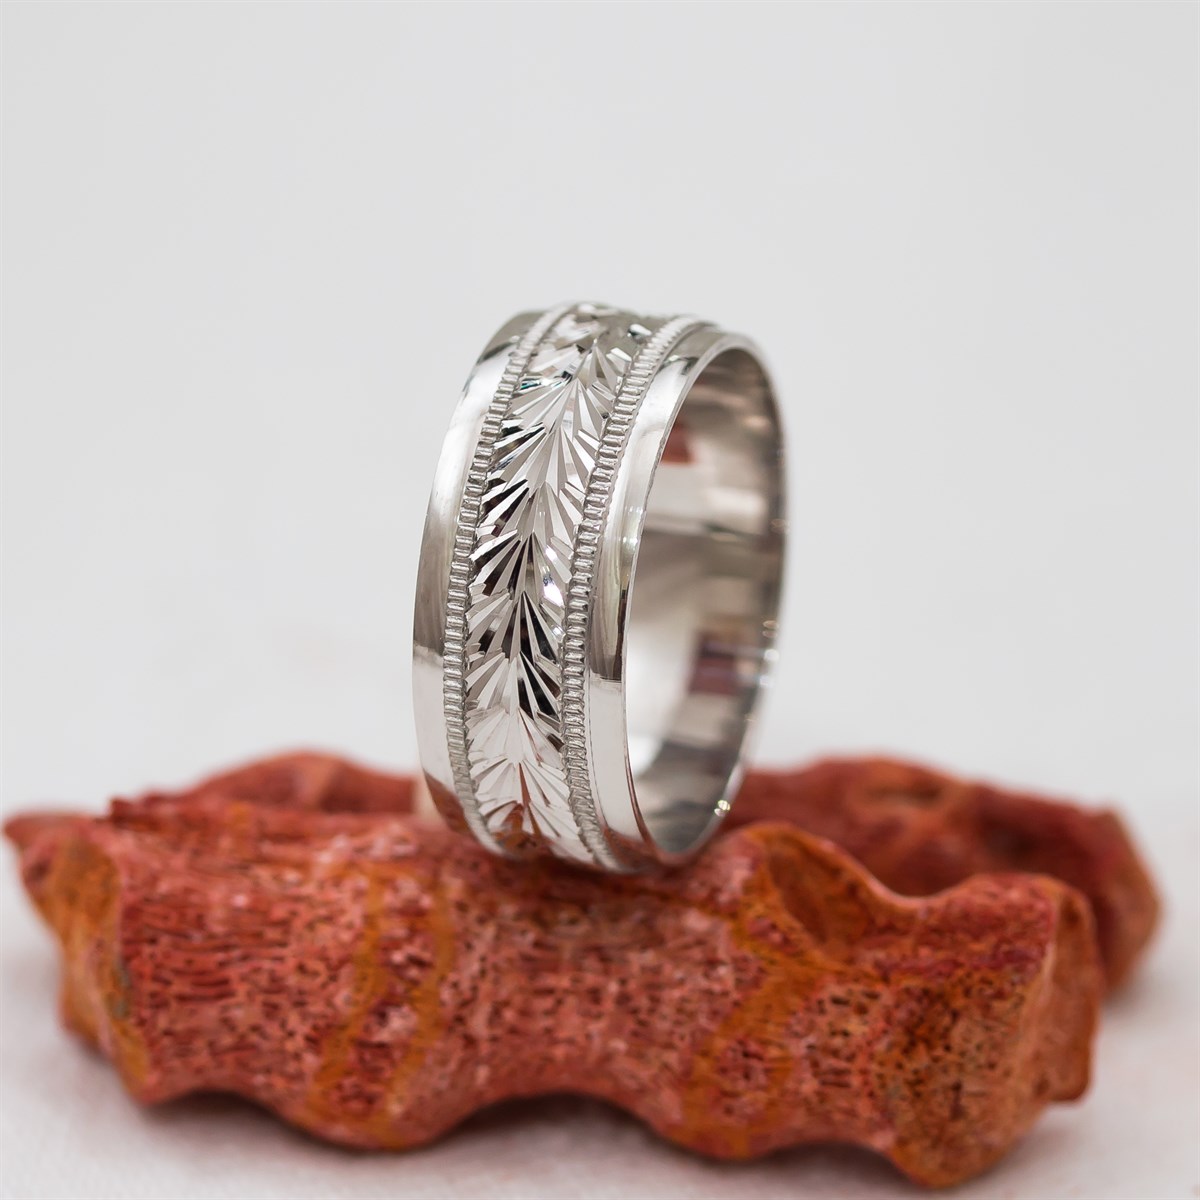 Unisex Sterling Silver Wedding Ring With Rhodium In The Middle